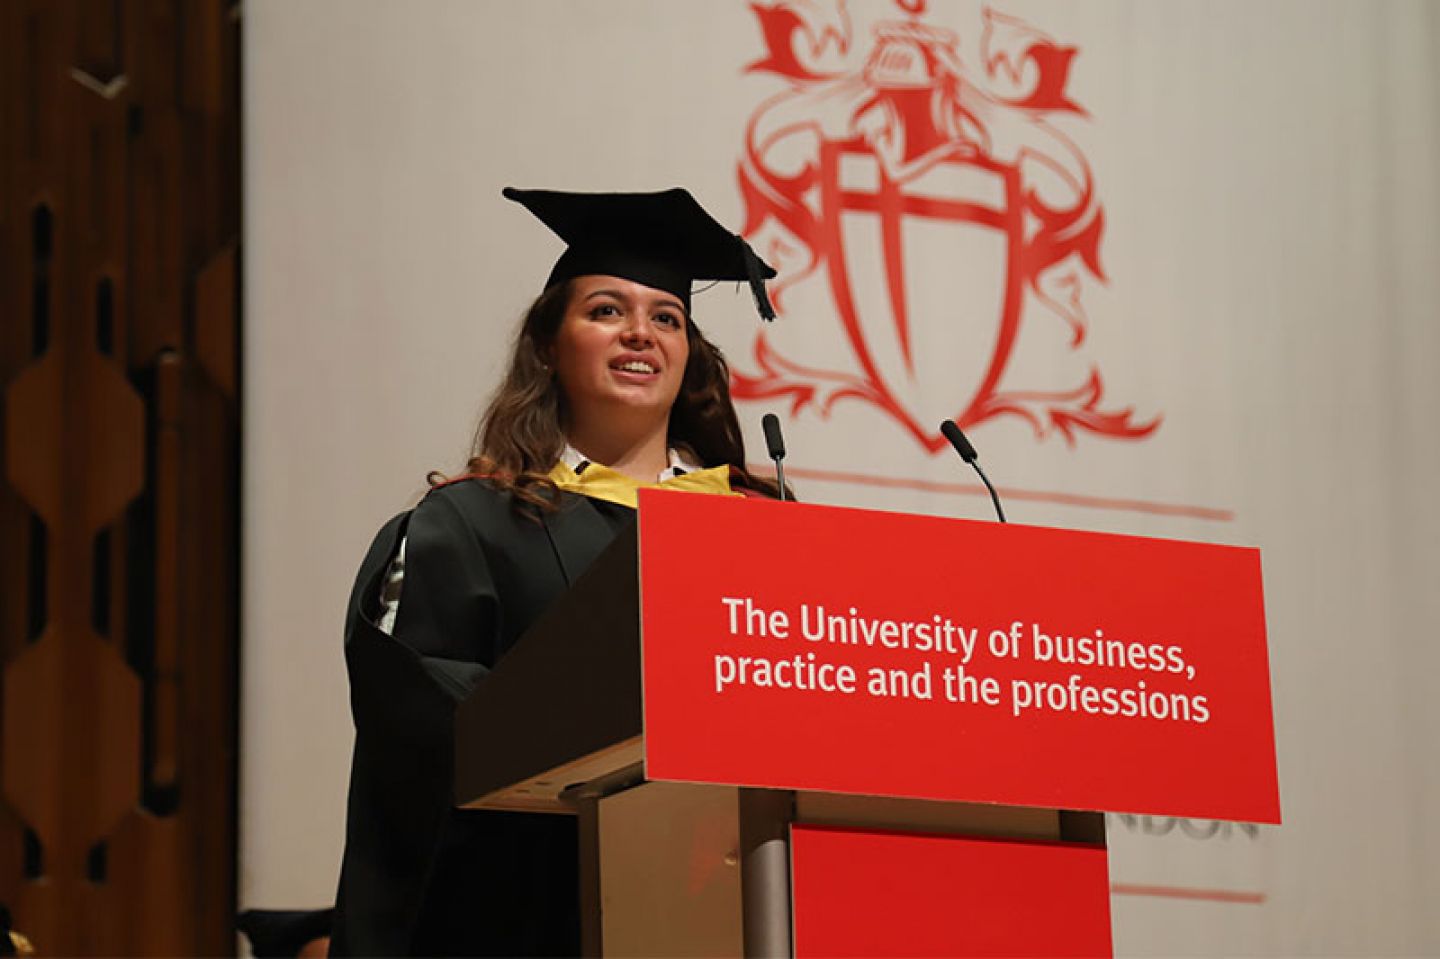 Student speaker Elena de Ficchy addresses her fellow students at her graduation ceremony in the Barbican Centre